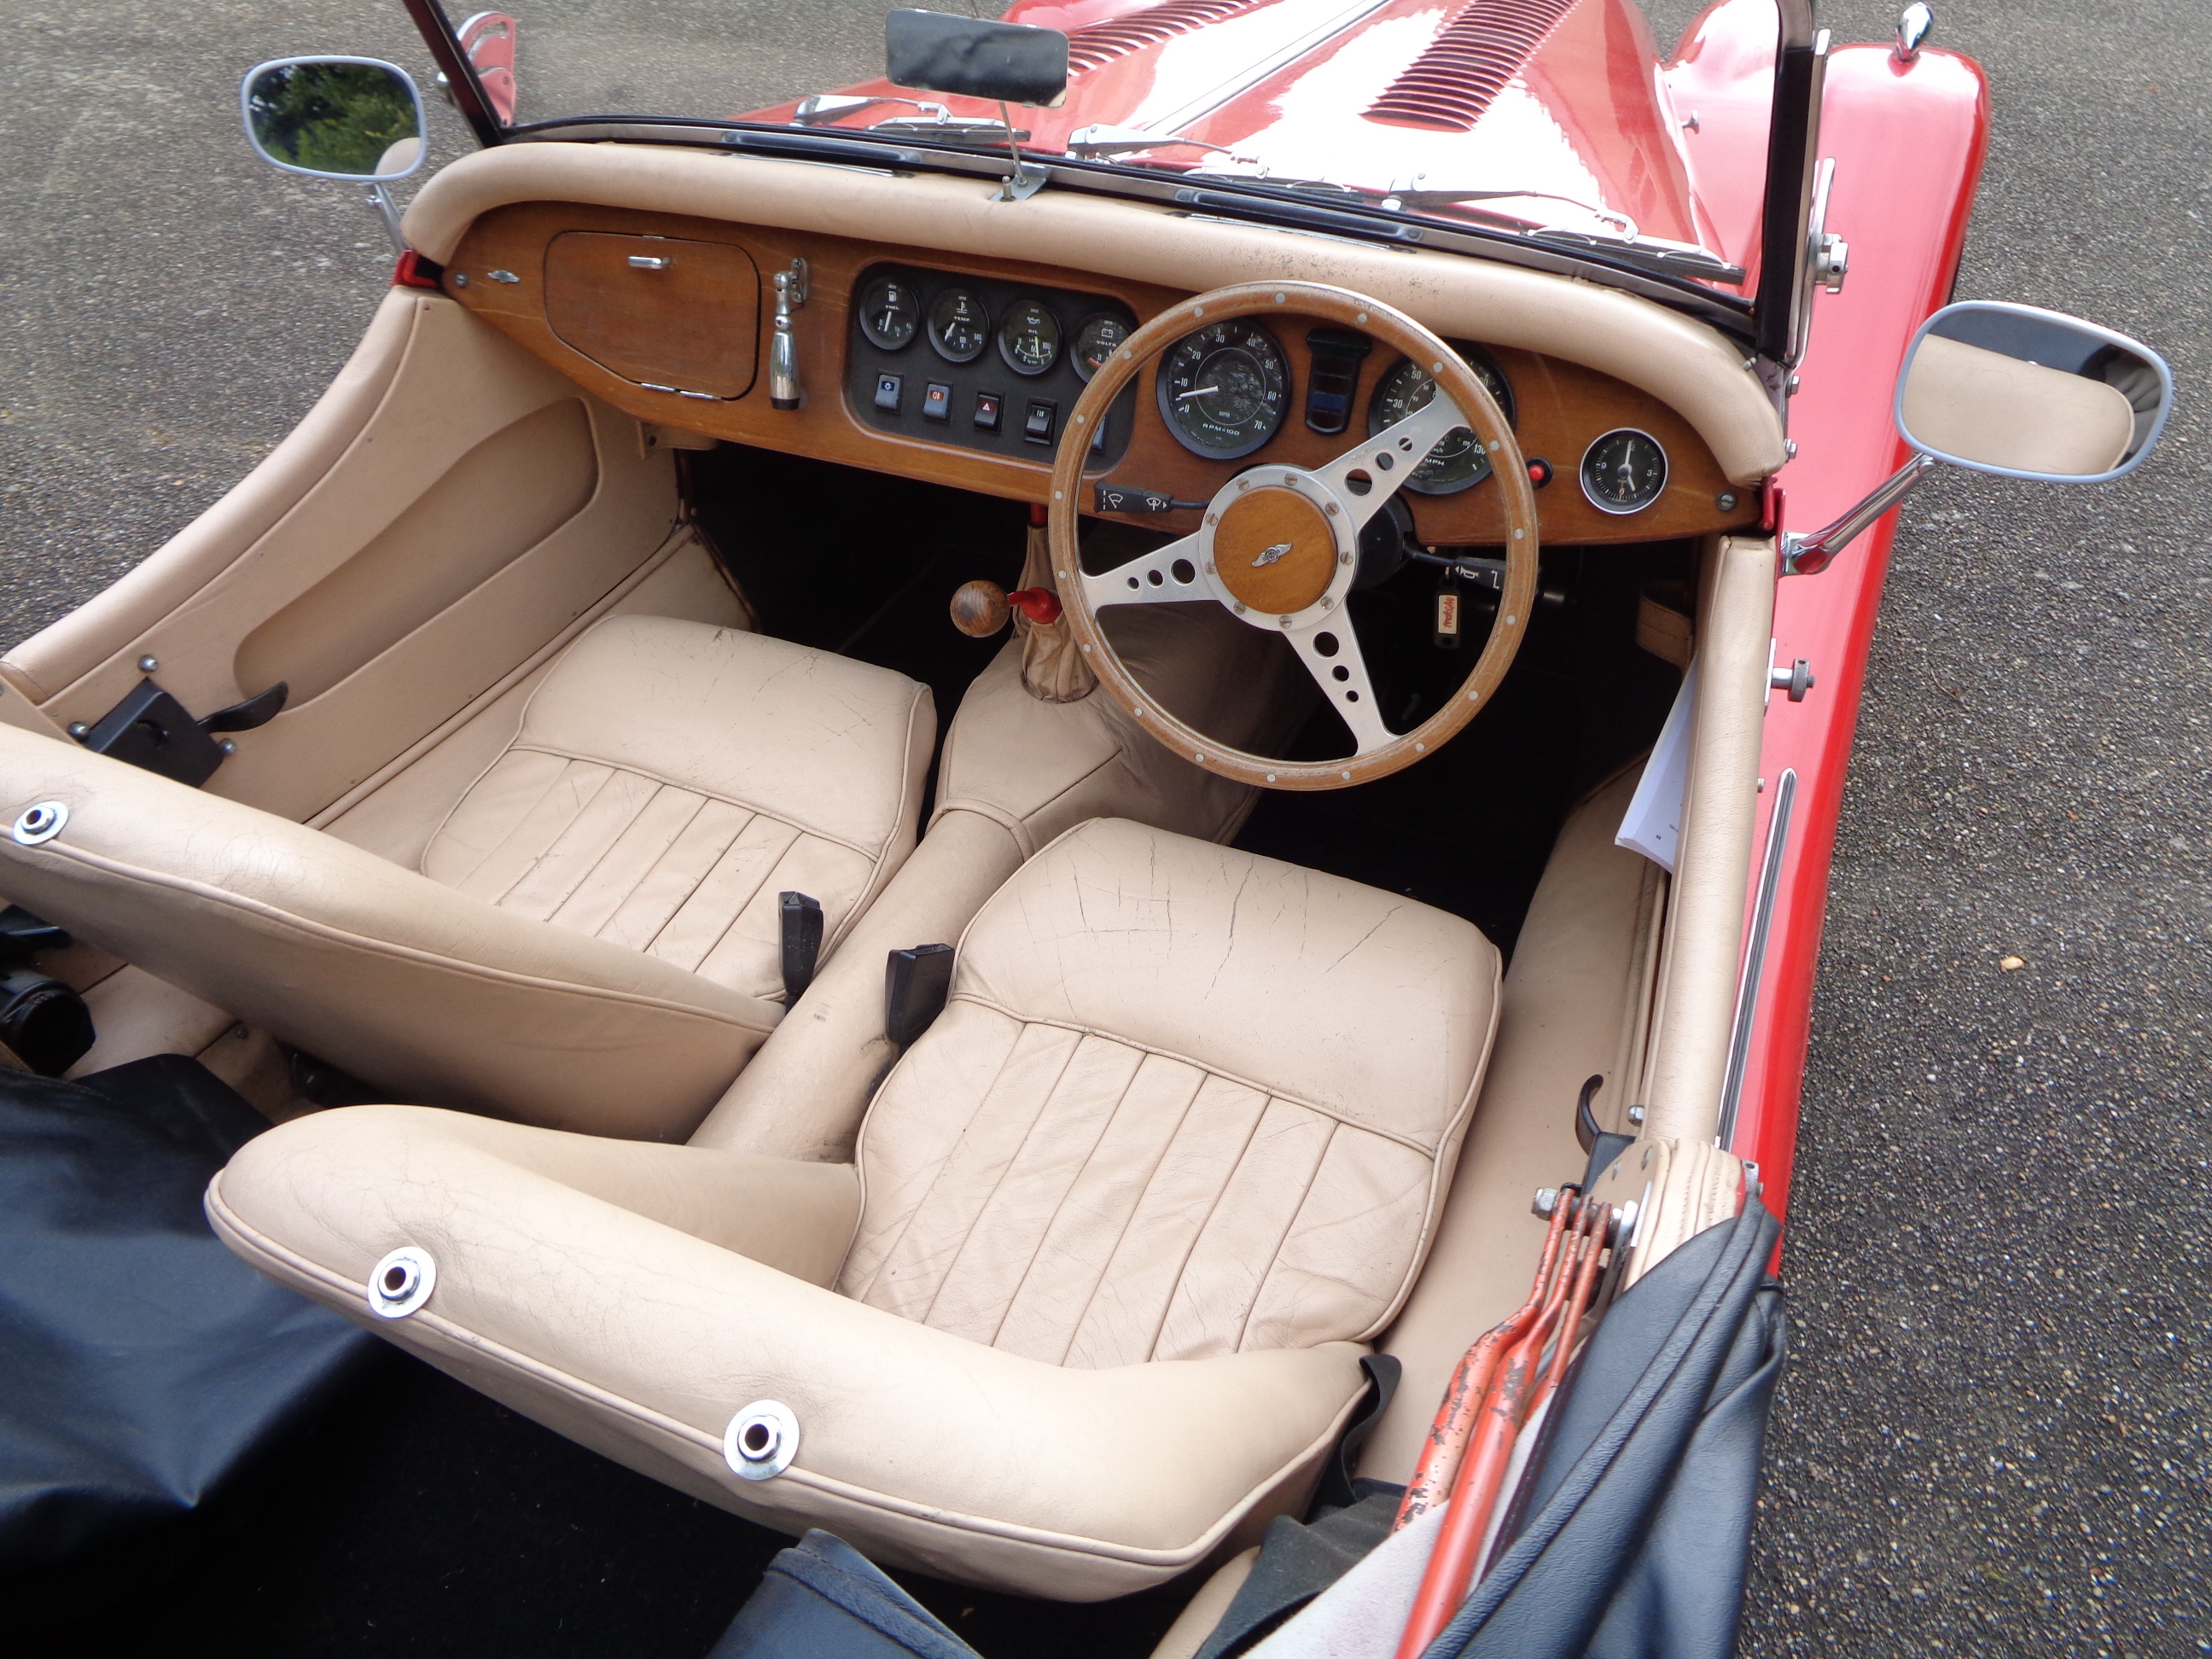 1983 Morgan 4/4 - Un-mistakable style for the British car enthusiast - A true gentleman’s car! - Image 7 of 19